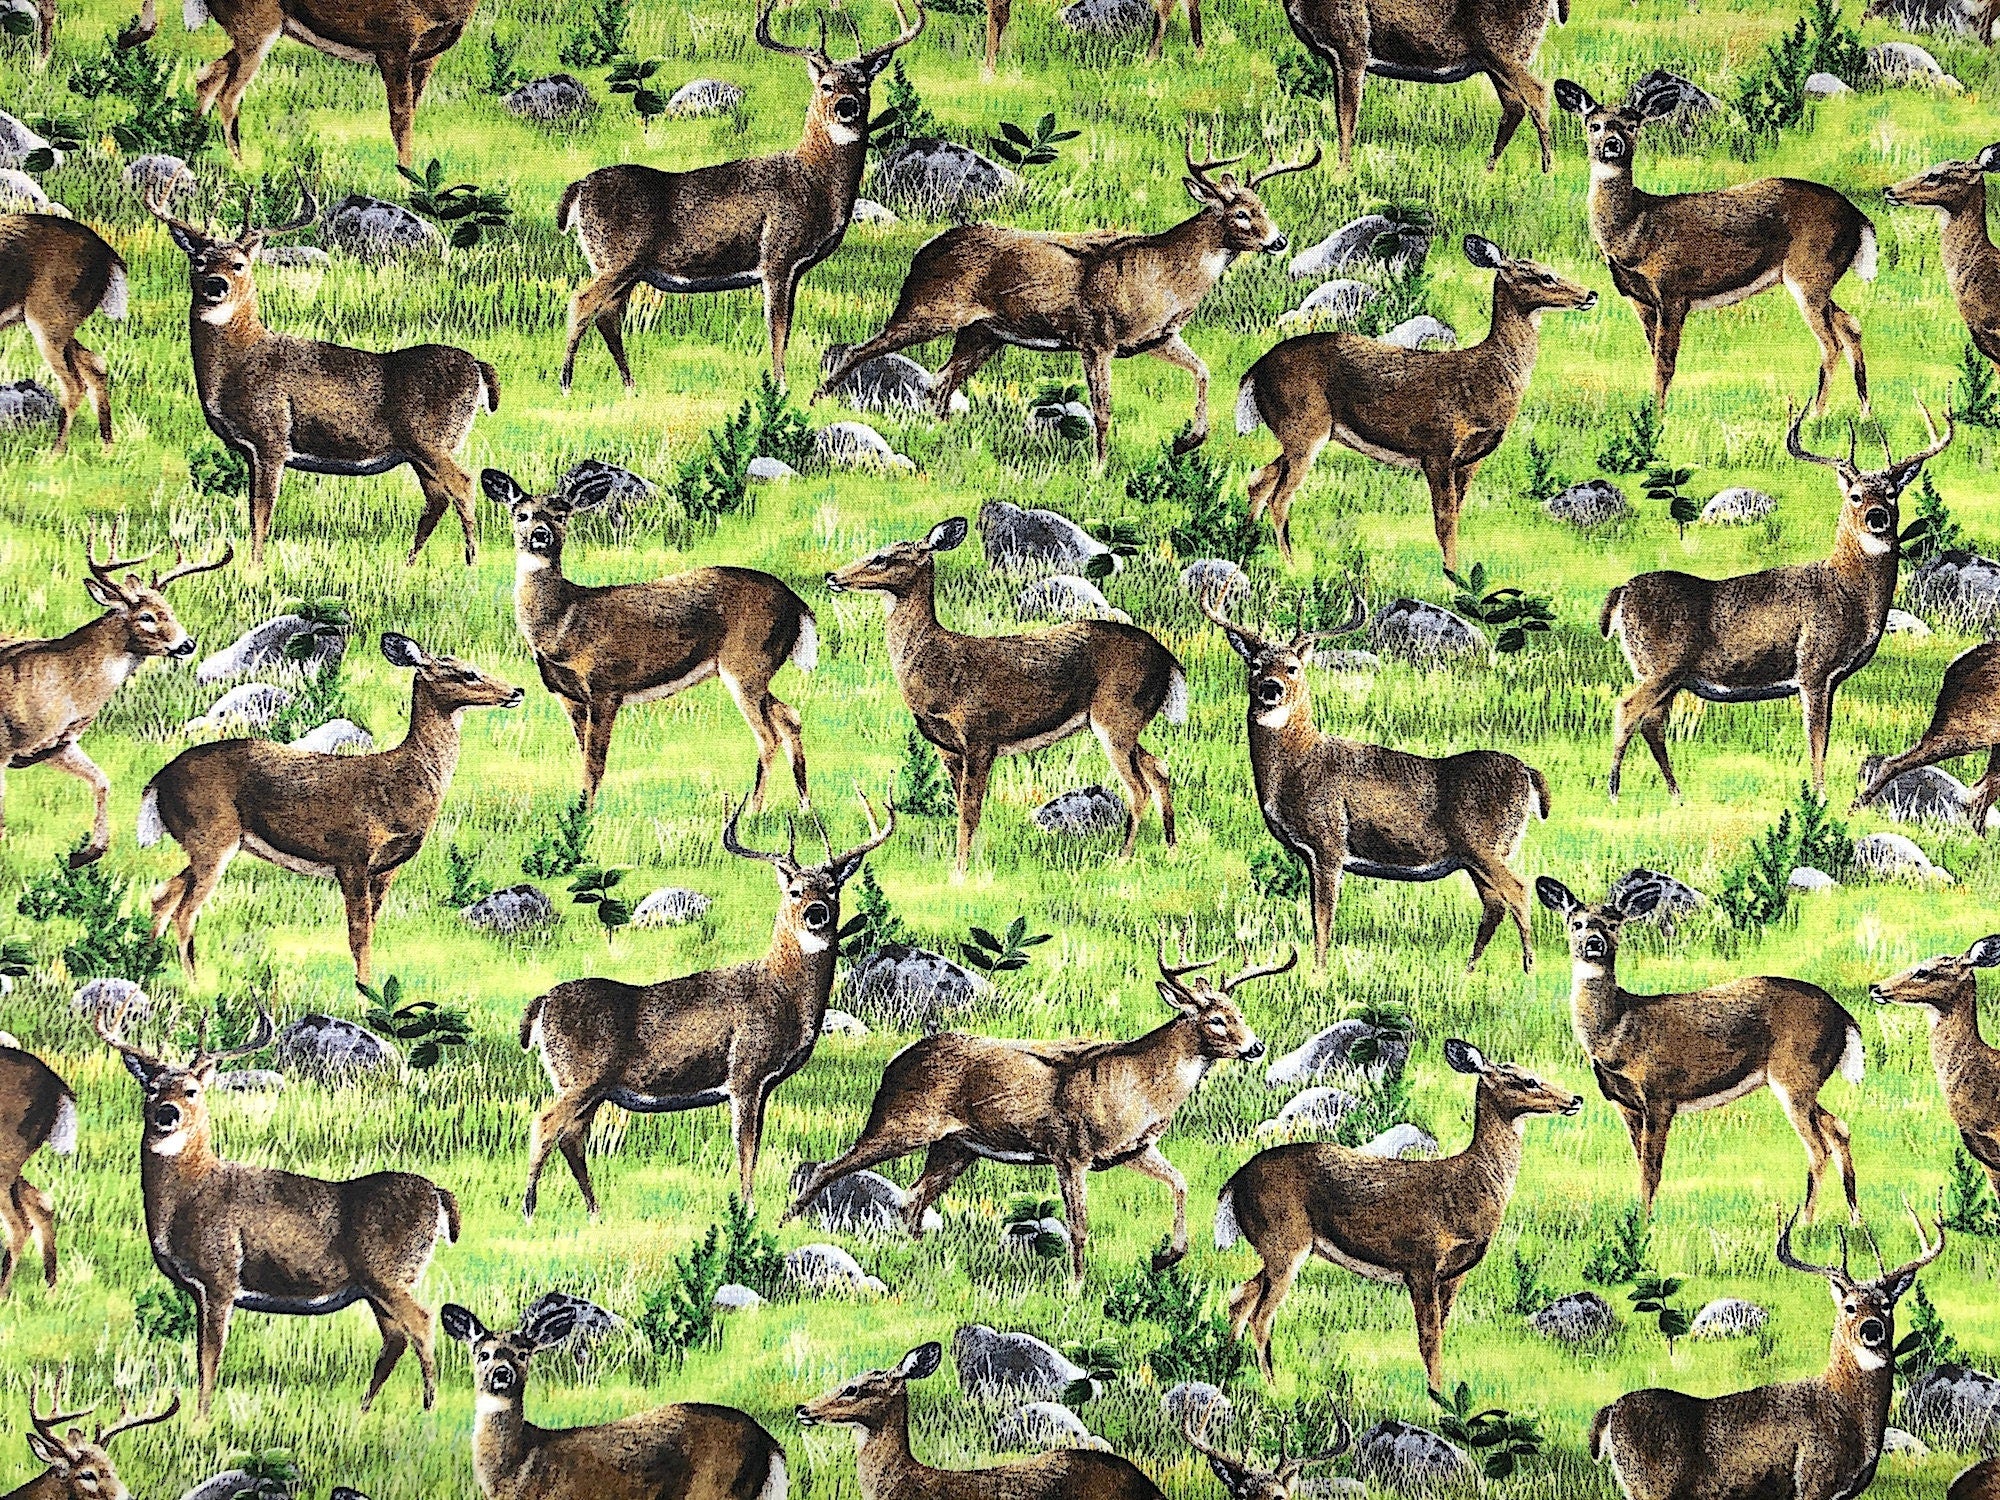 This wildlife fabric is covered with deer roaming throughout a field of grass and rocks.